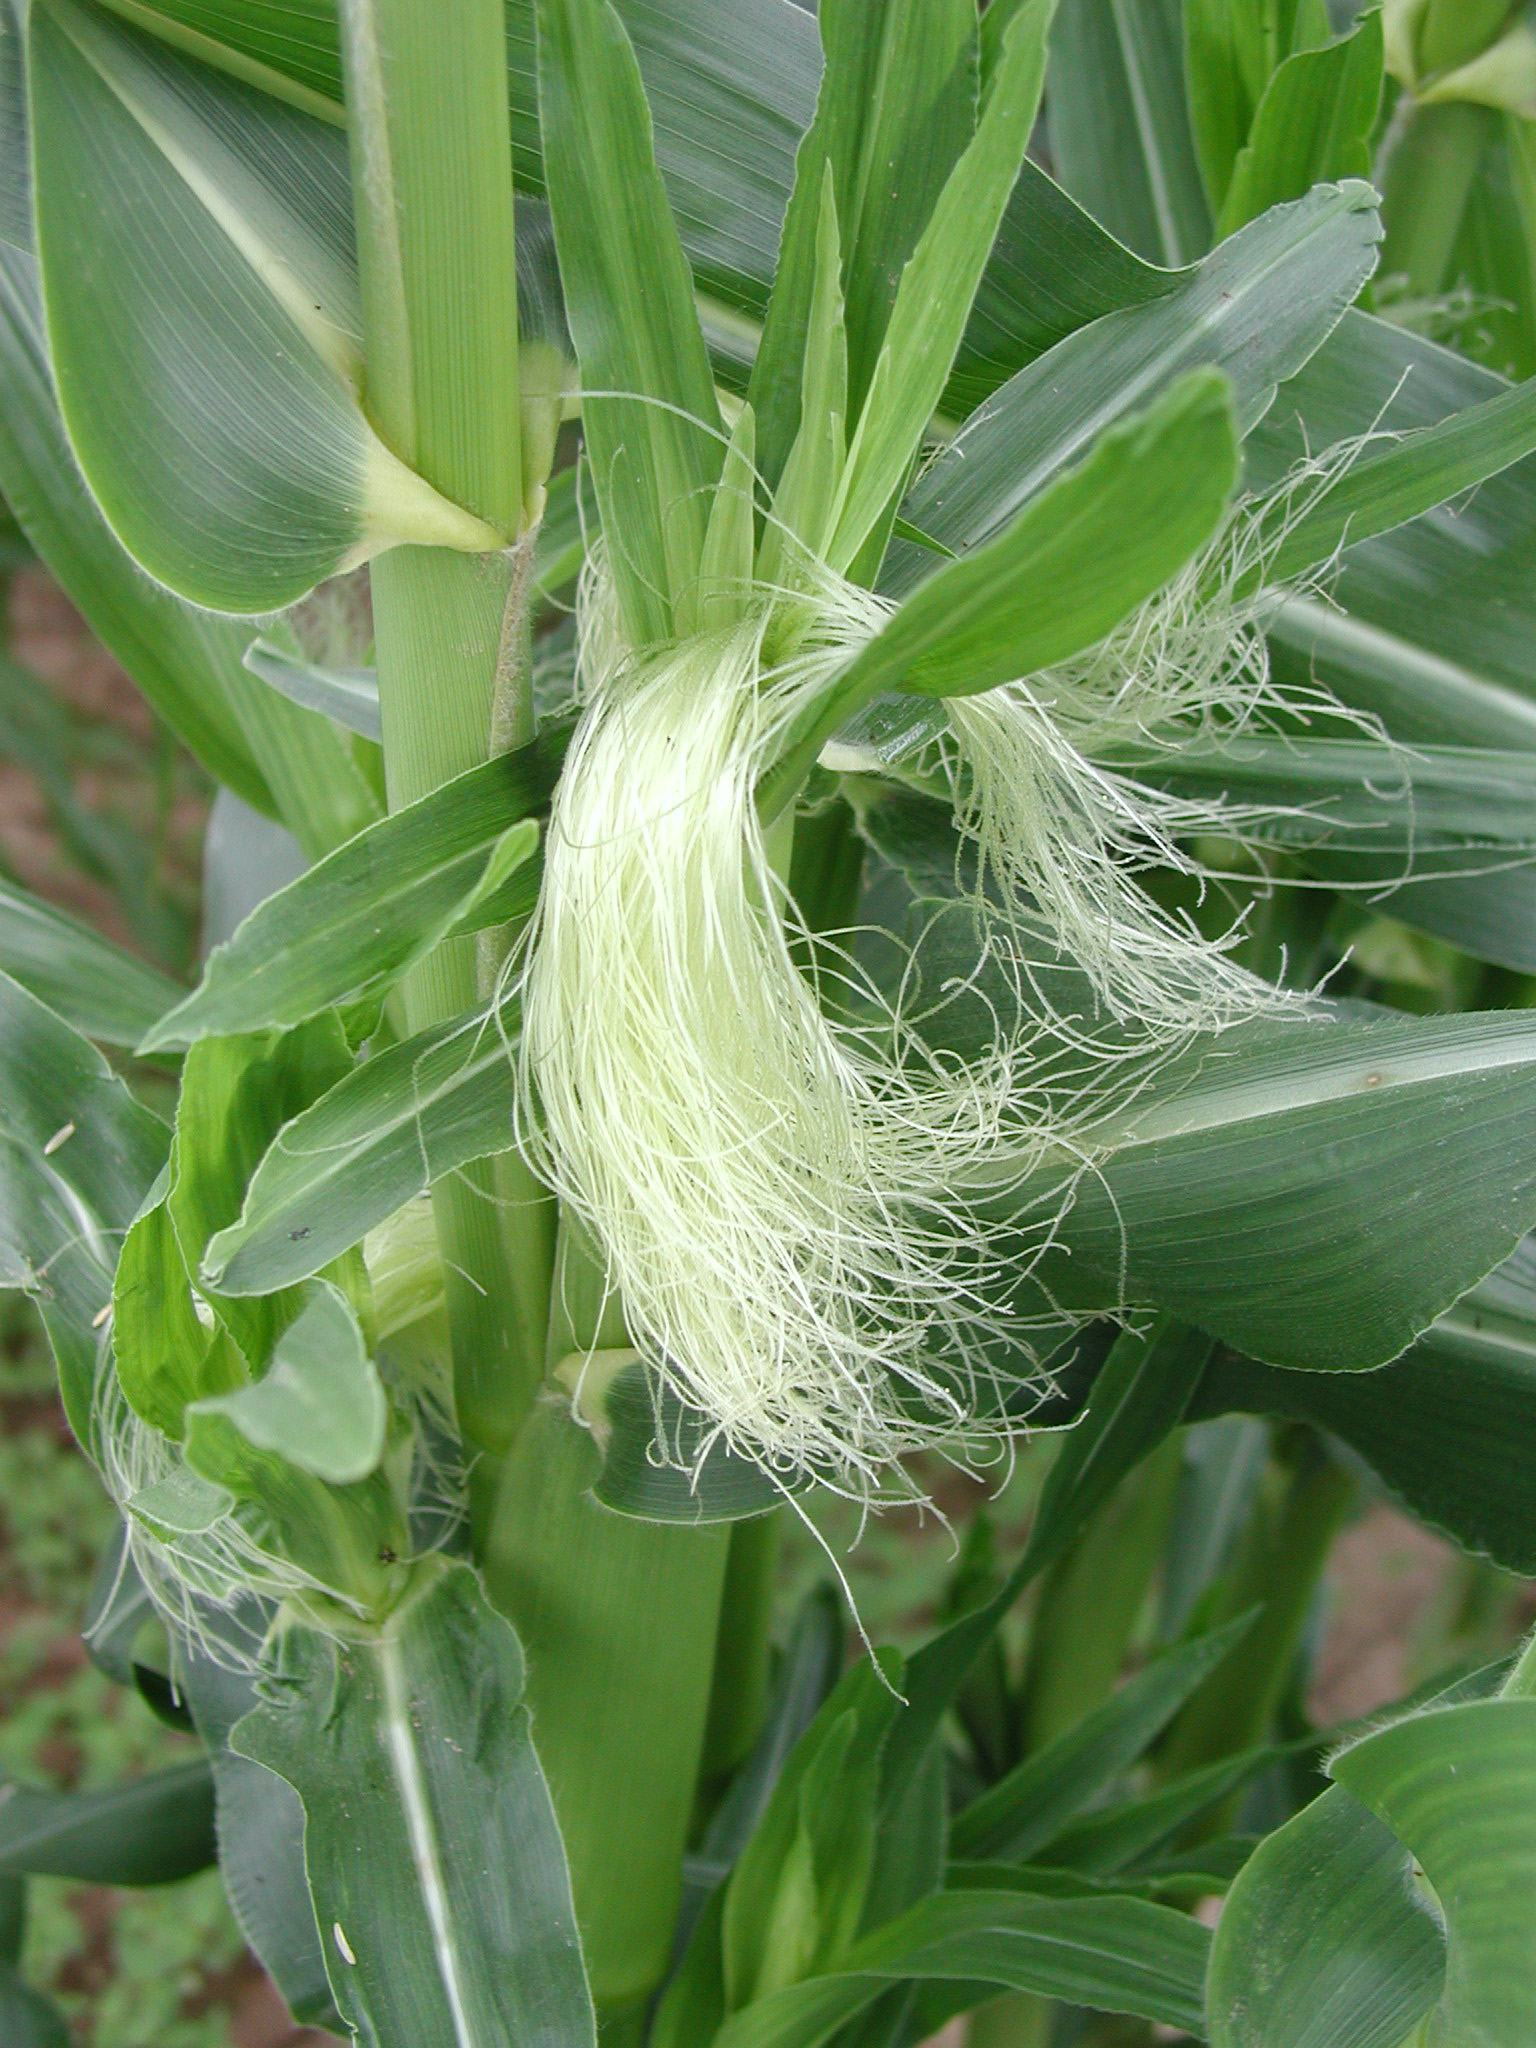 Corn is one of the world’s most important crops and scientists have labored for over a century in an effort to understand how it was developed. Image courtesy Gerald Klingaman.